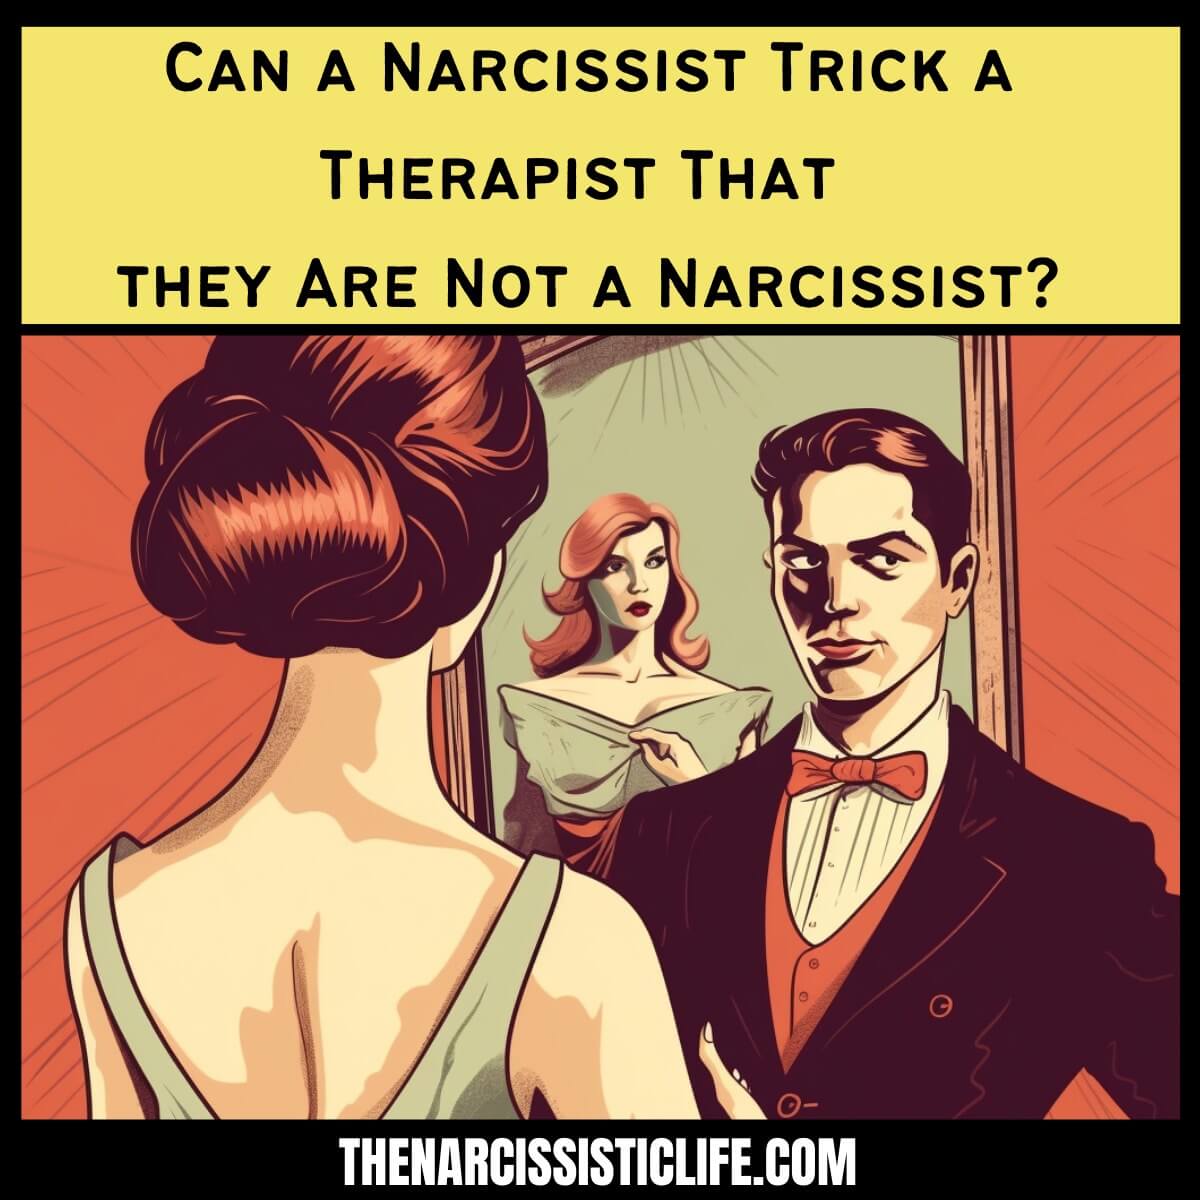 Can a Narcissist Trick a Therapist That they Are Not a Narcissist